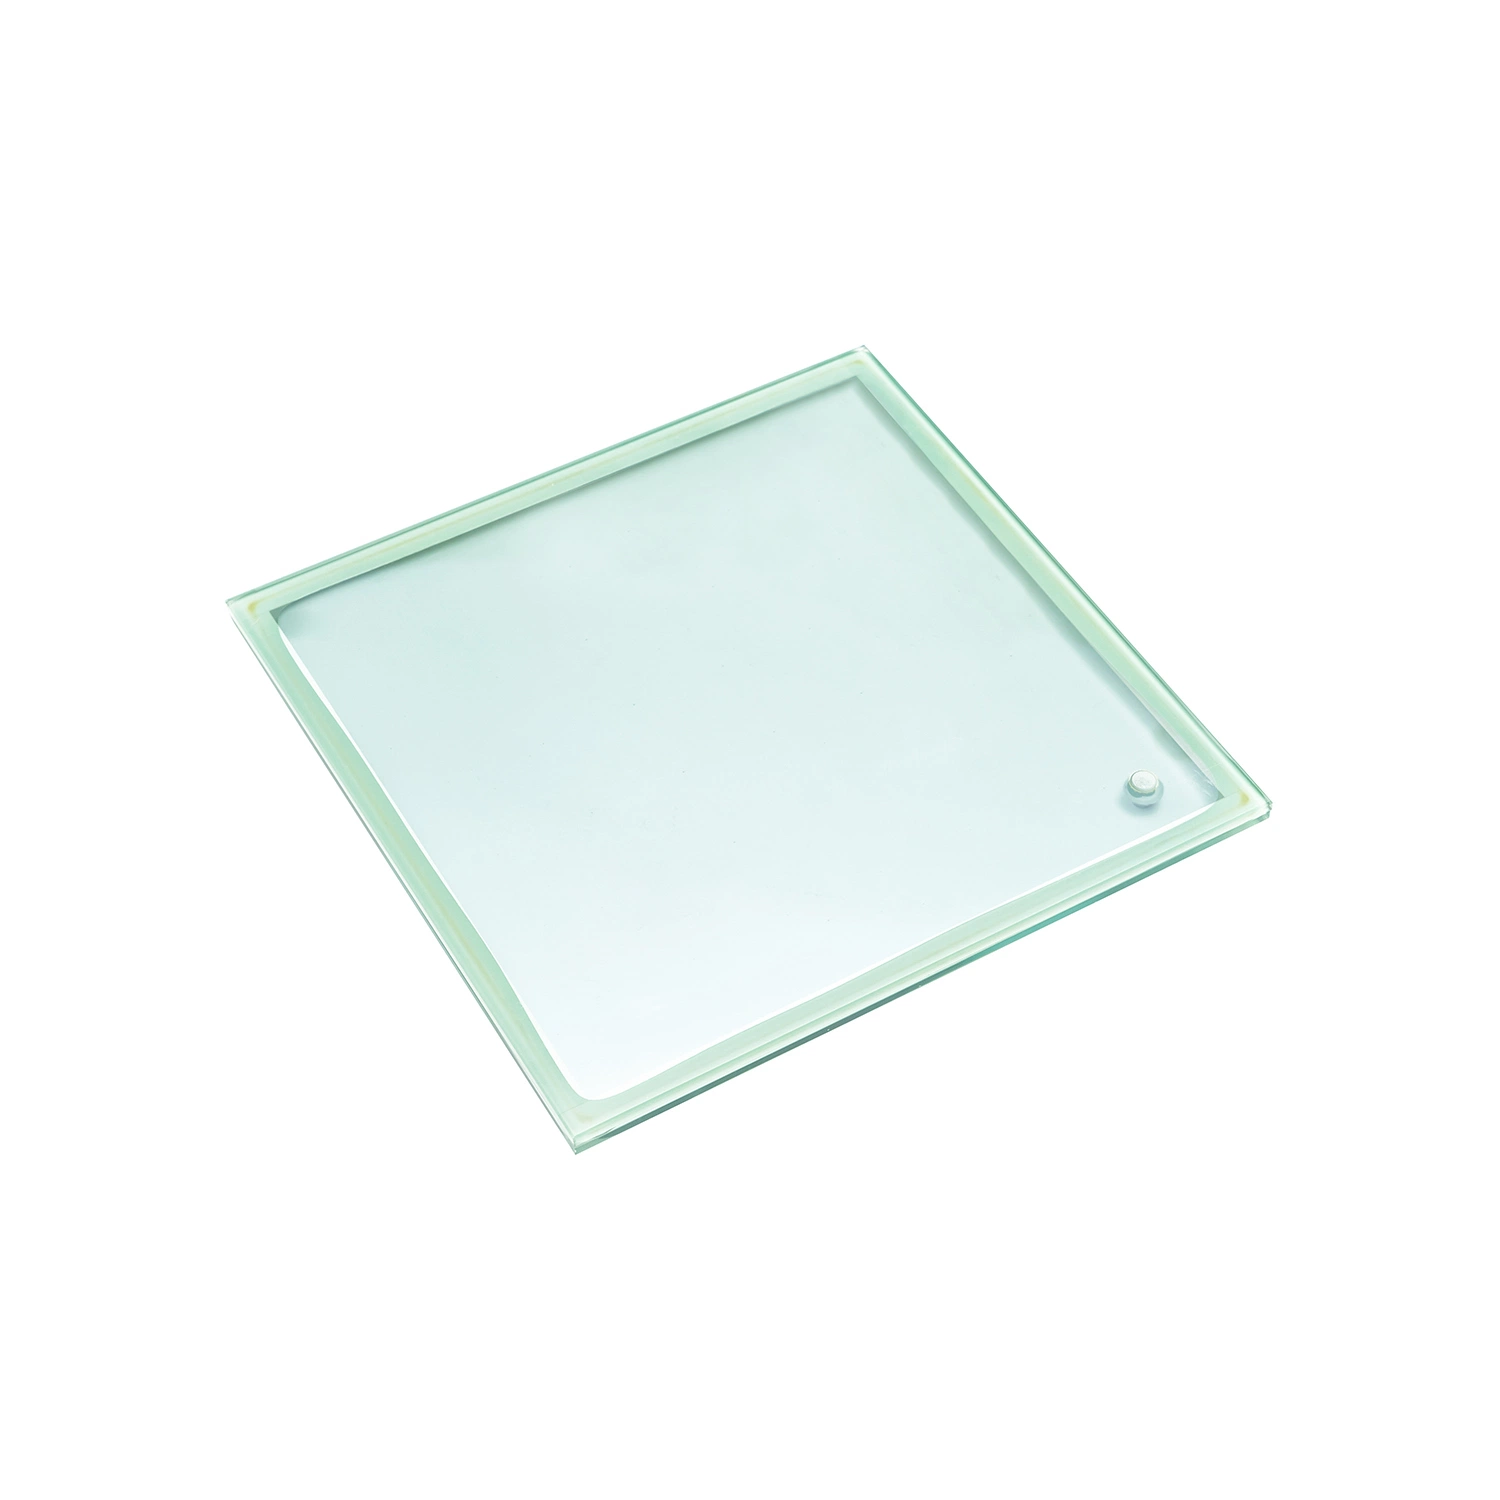 Window Glass / Building Glass / Construction Glass Tempered Glass 4mm 6mm 8mm 10mm 12mm